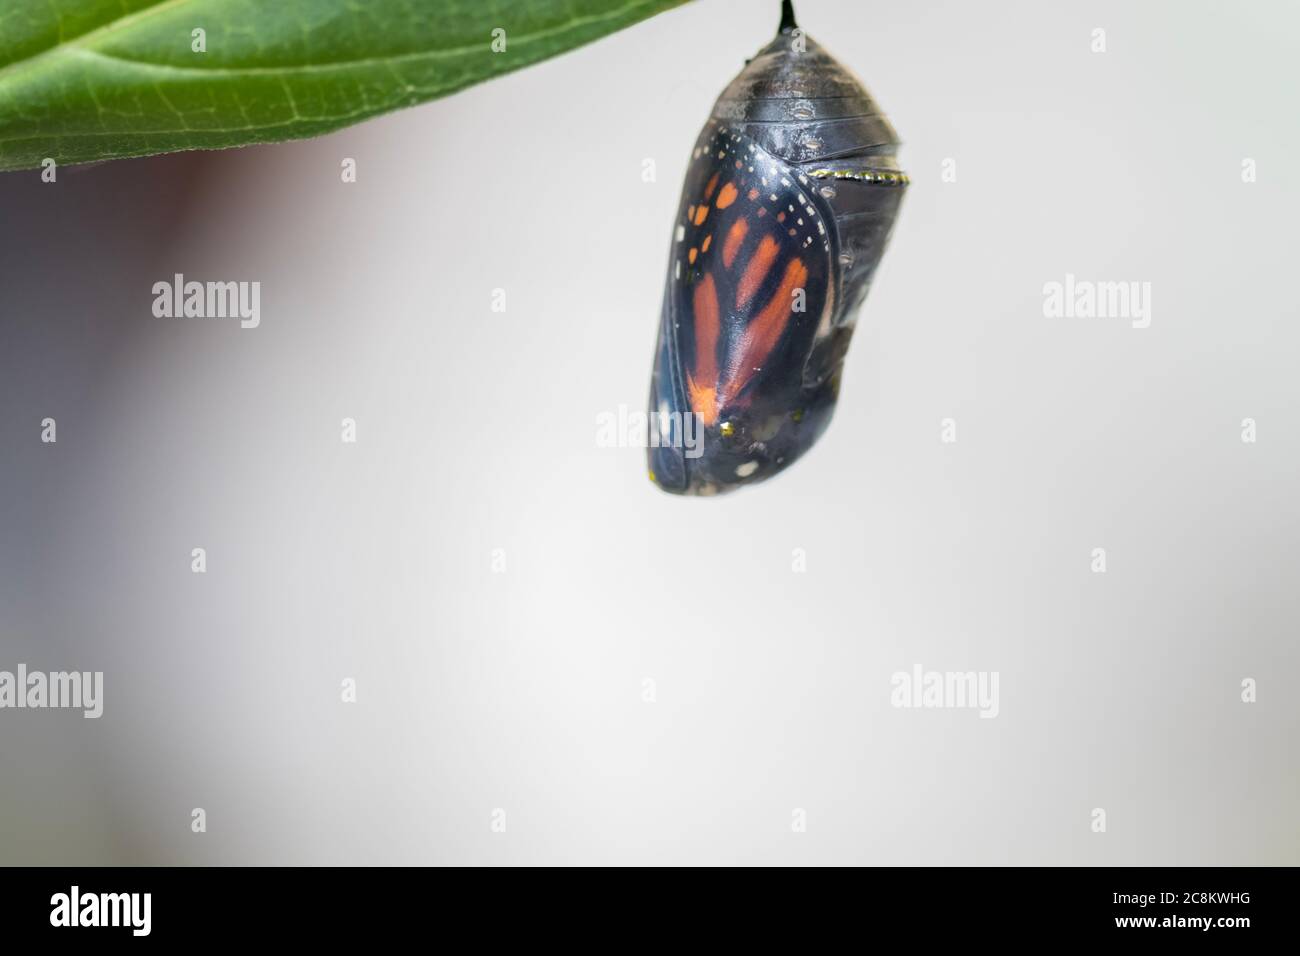 Monarch butterfly, Danaus plexippuson, about to emerge from chrysalis Stock Photo